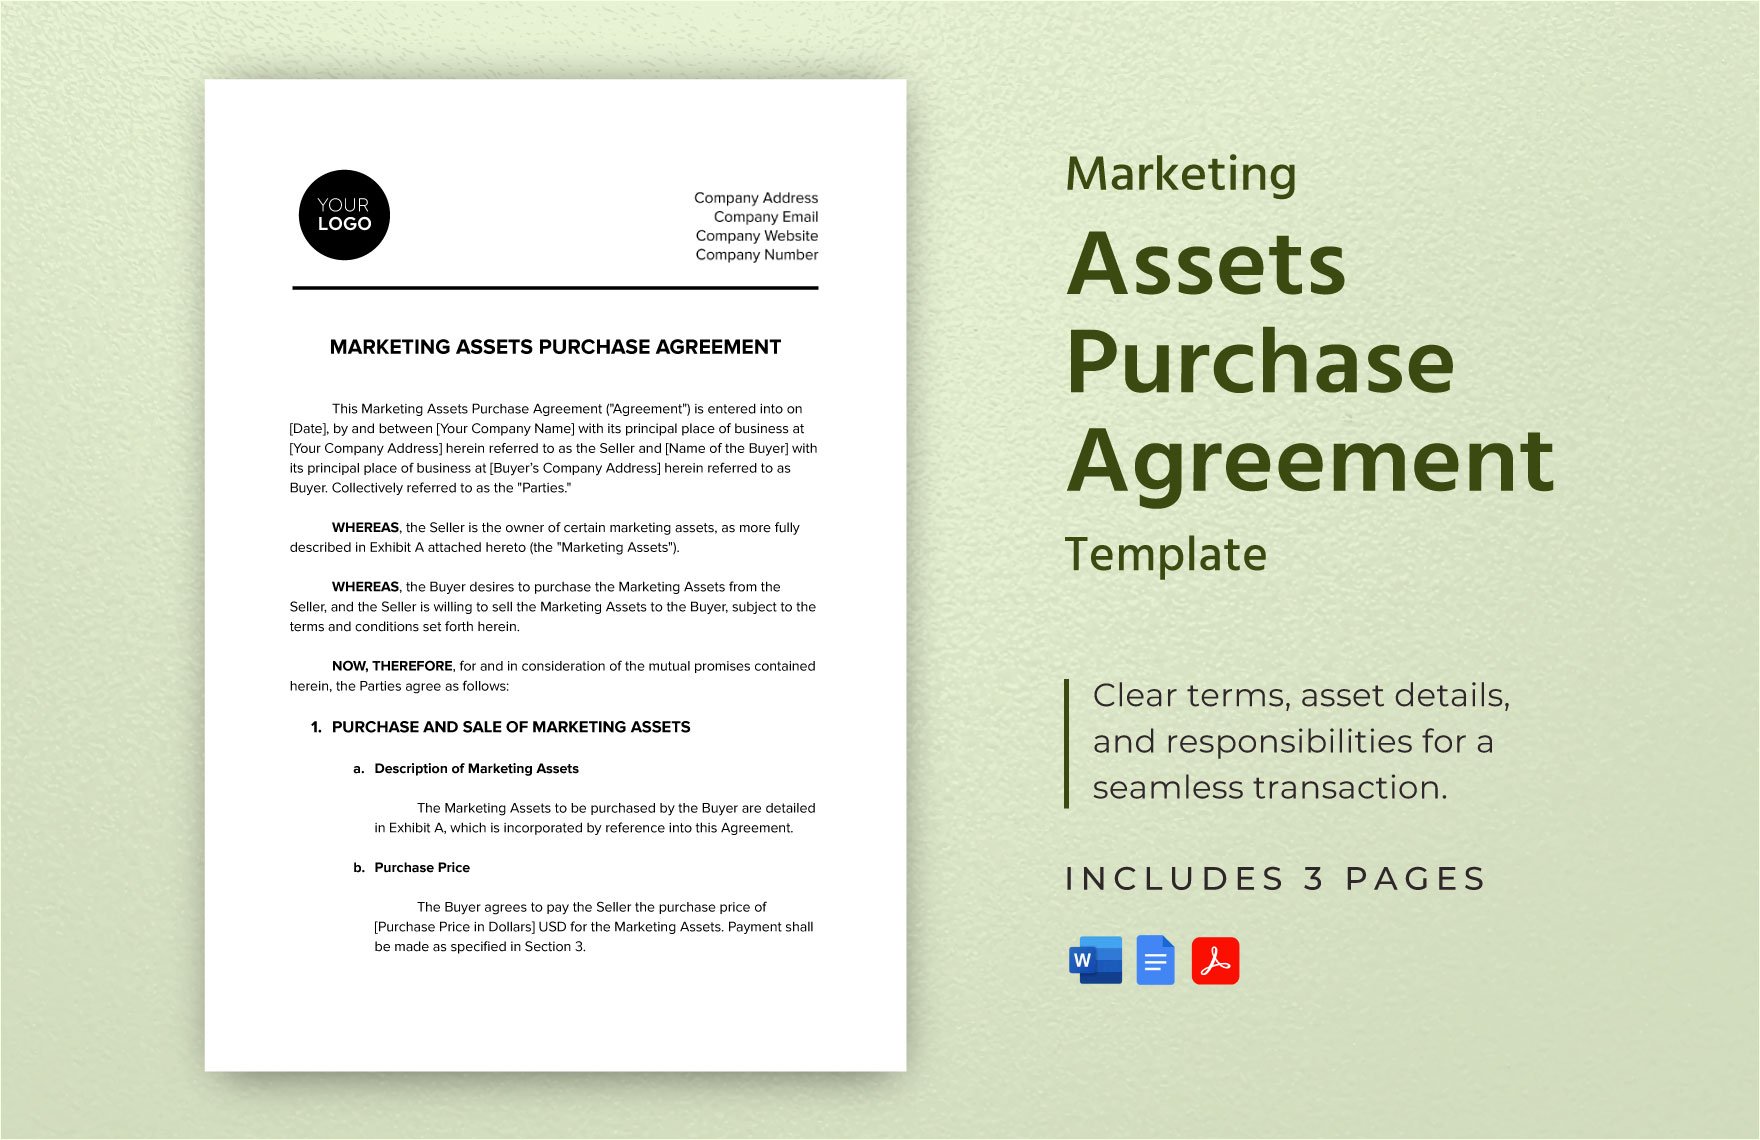 Marketing Assets Purchase Agreement Template